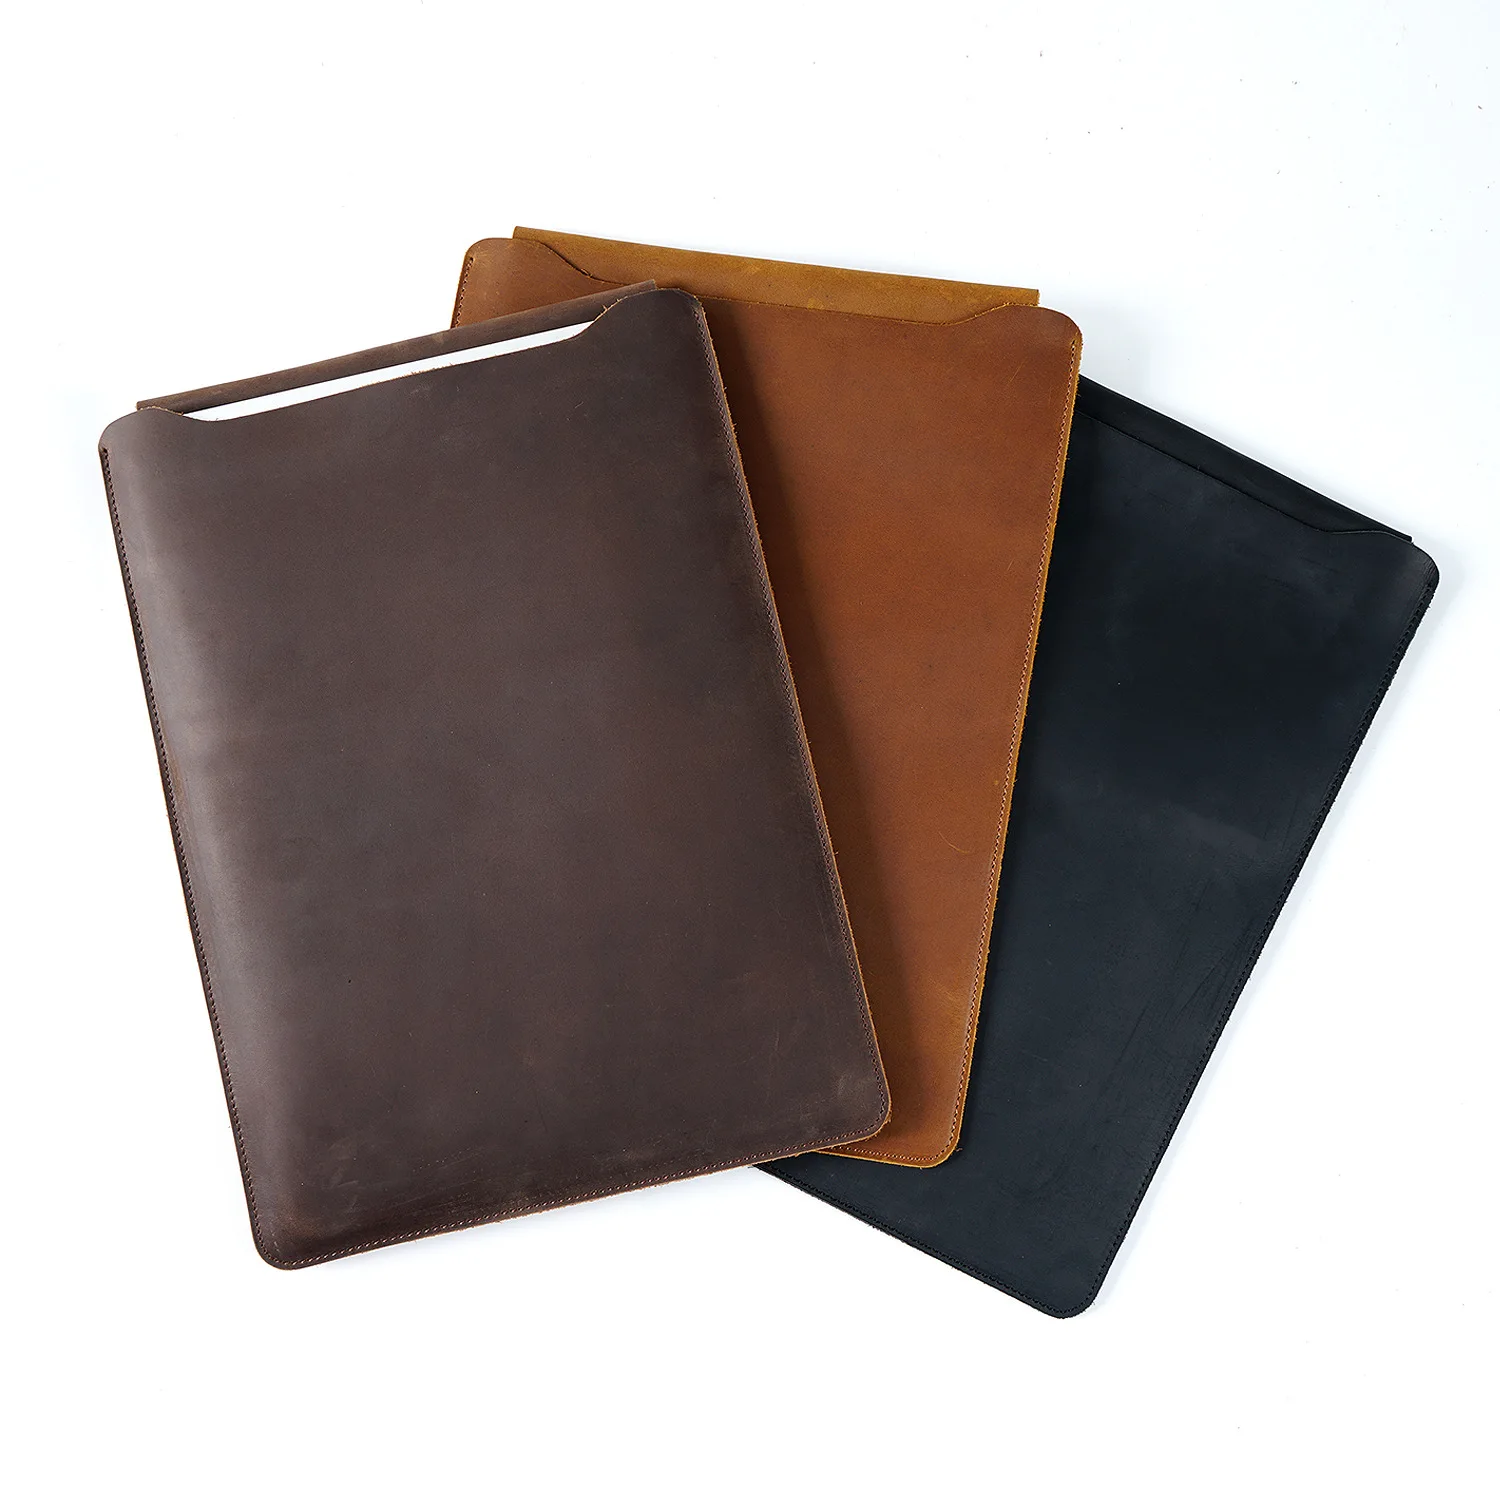 Leisure leather computer bag, notebook inner bag, suitable for Apple Huawei 12 inch, 13 inch and 14 inch computers